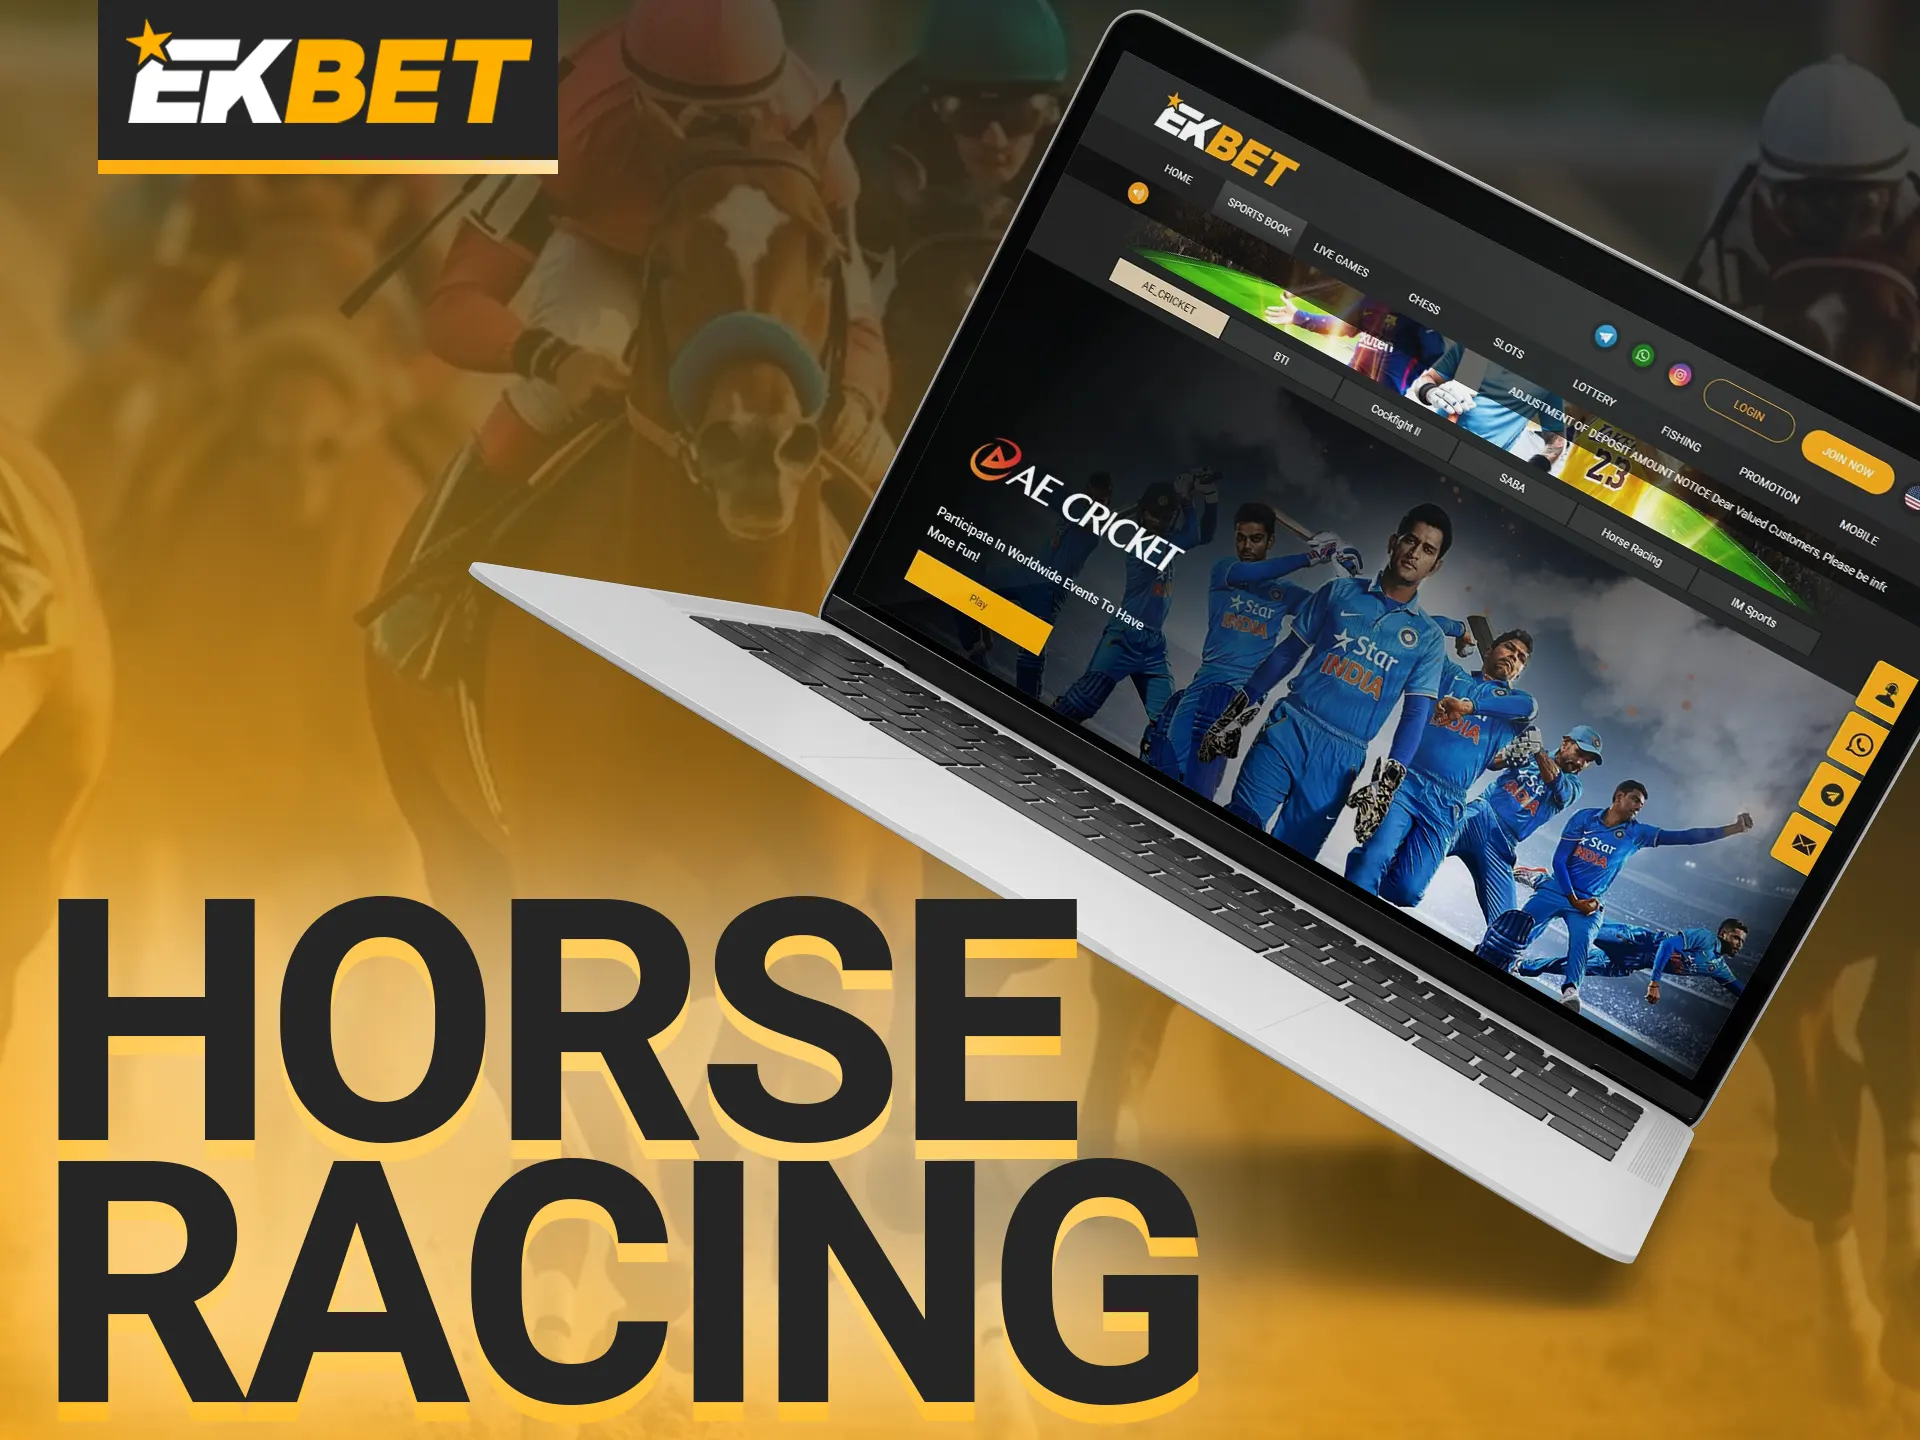 Place your horse racing bets at EKbet.